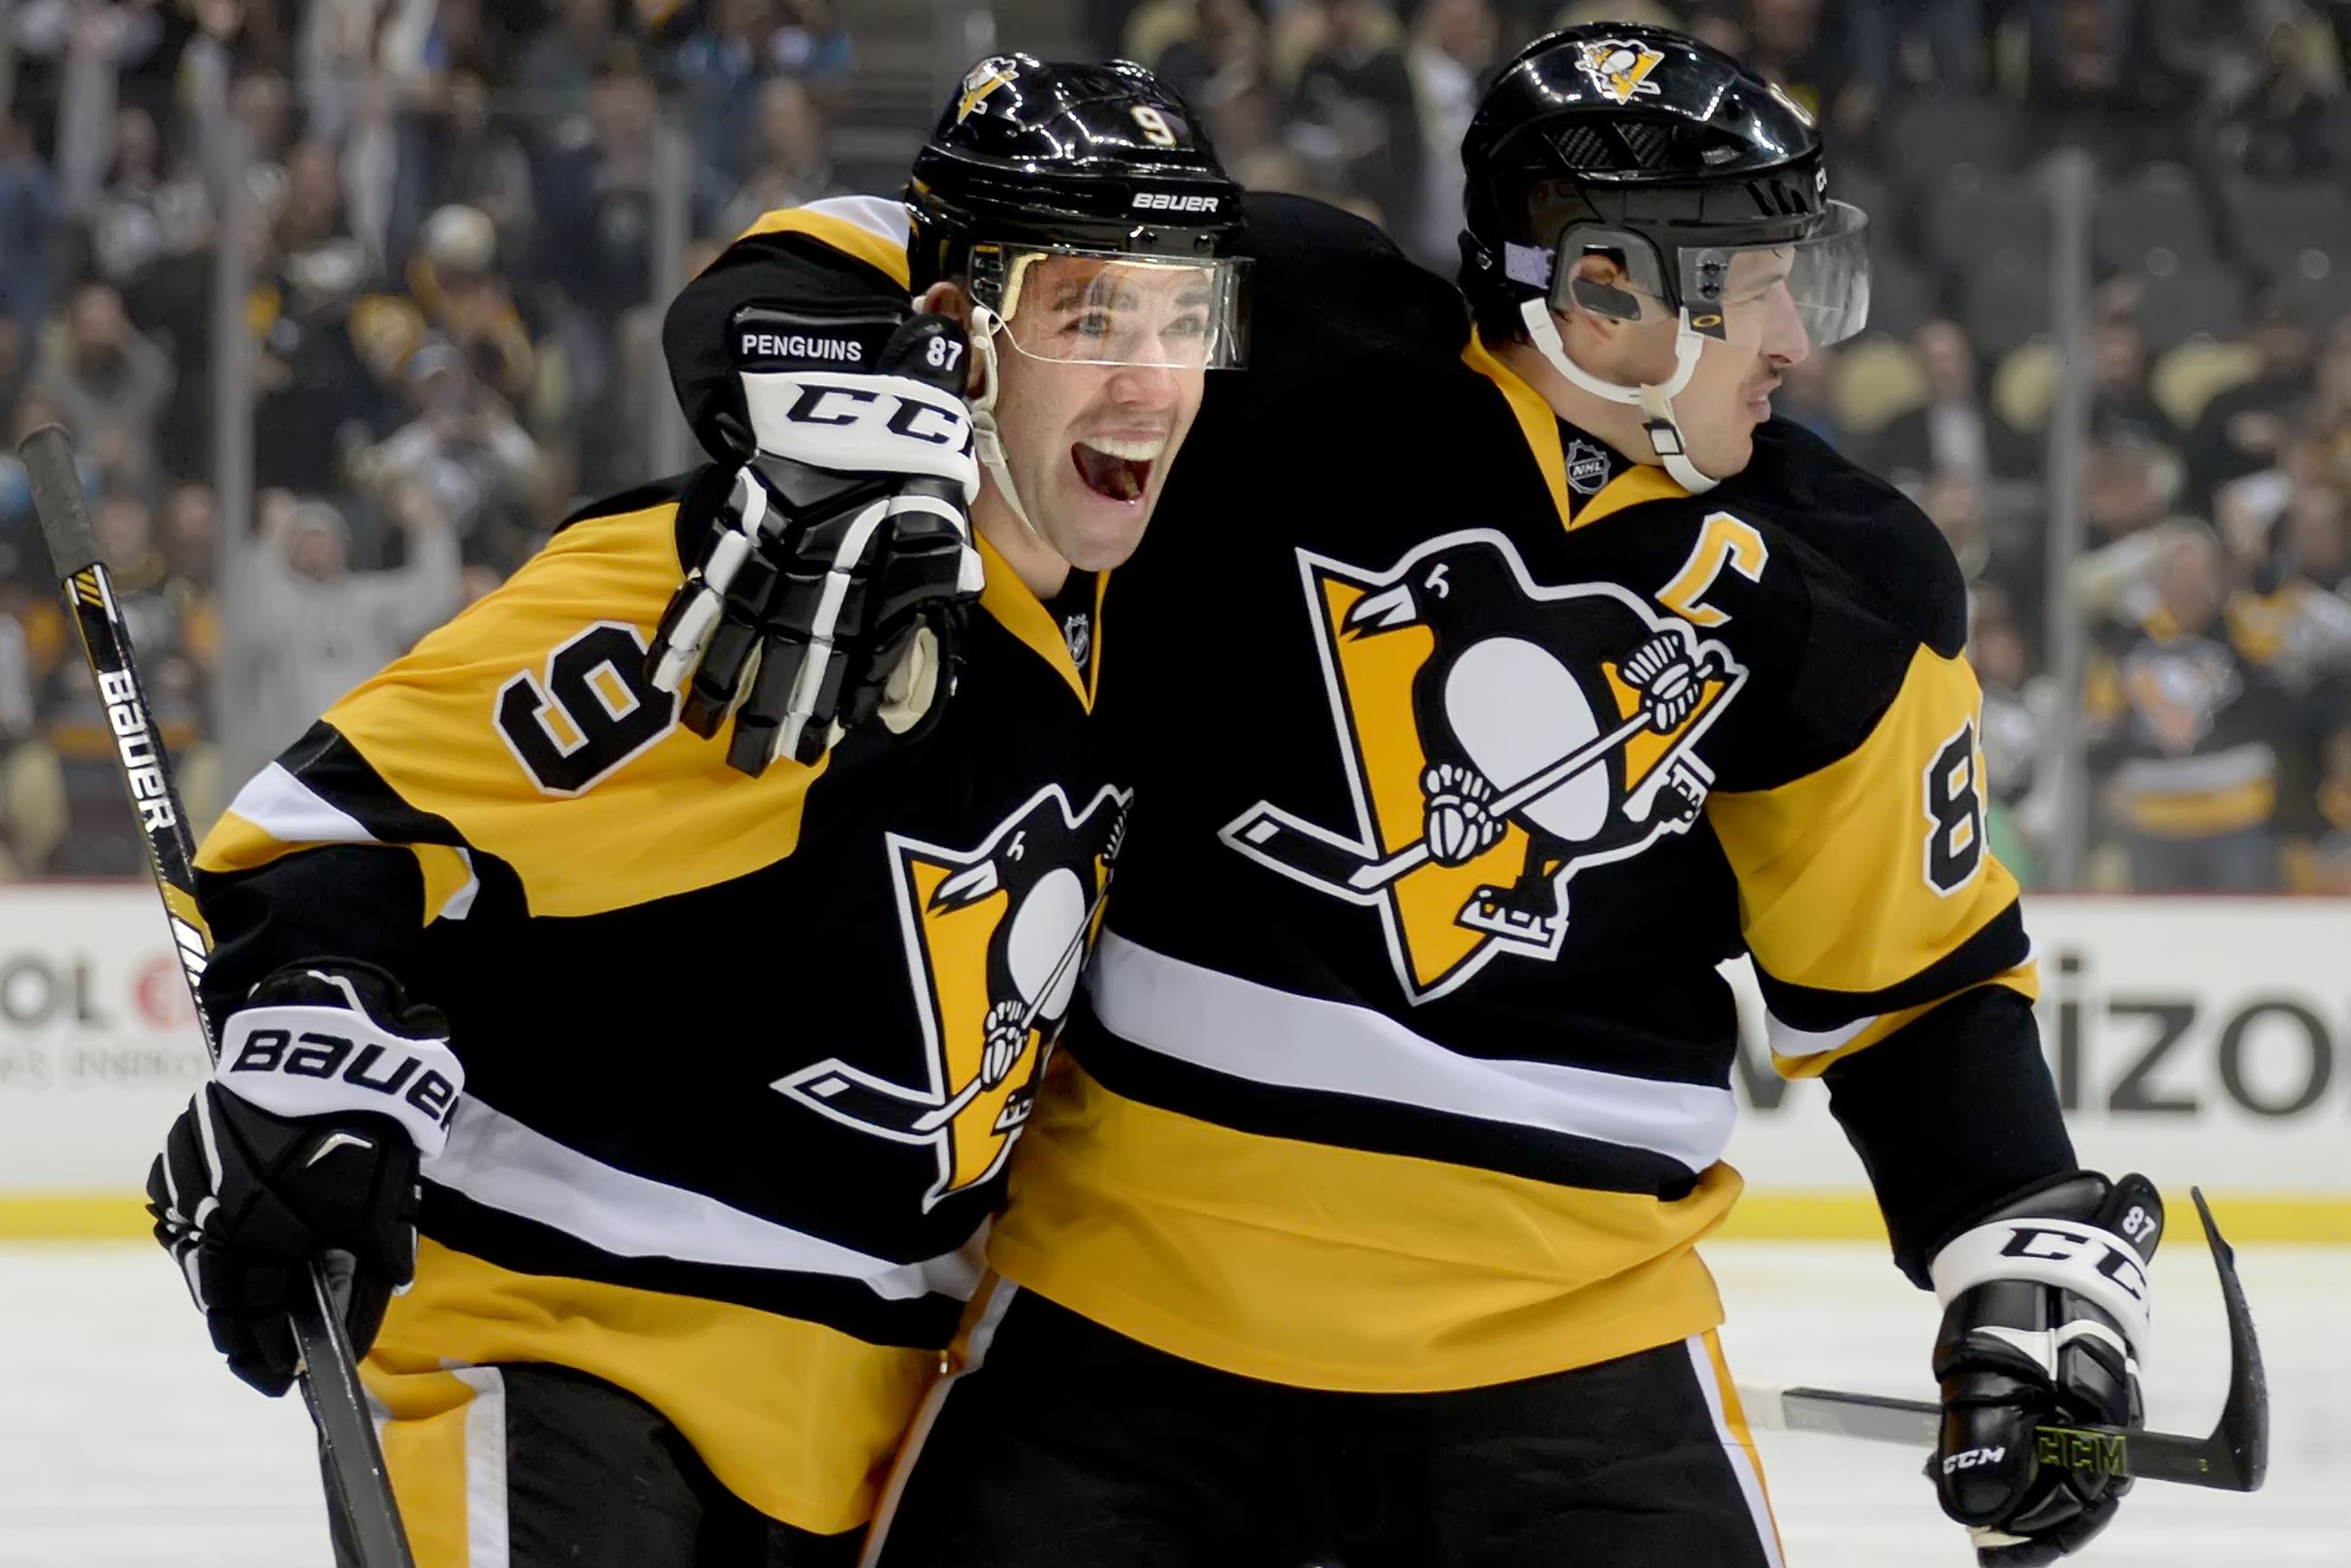 Evgeni Malkin celebrated his smooth shootout winner in the worst